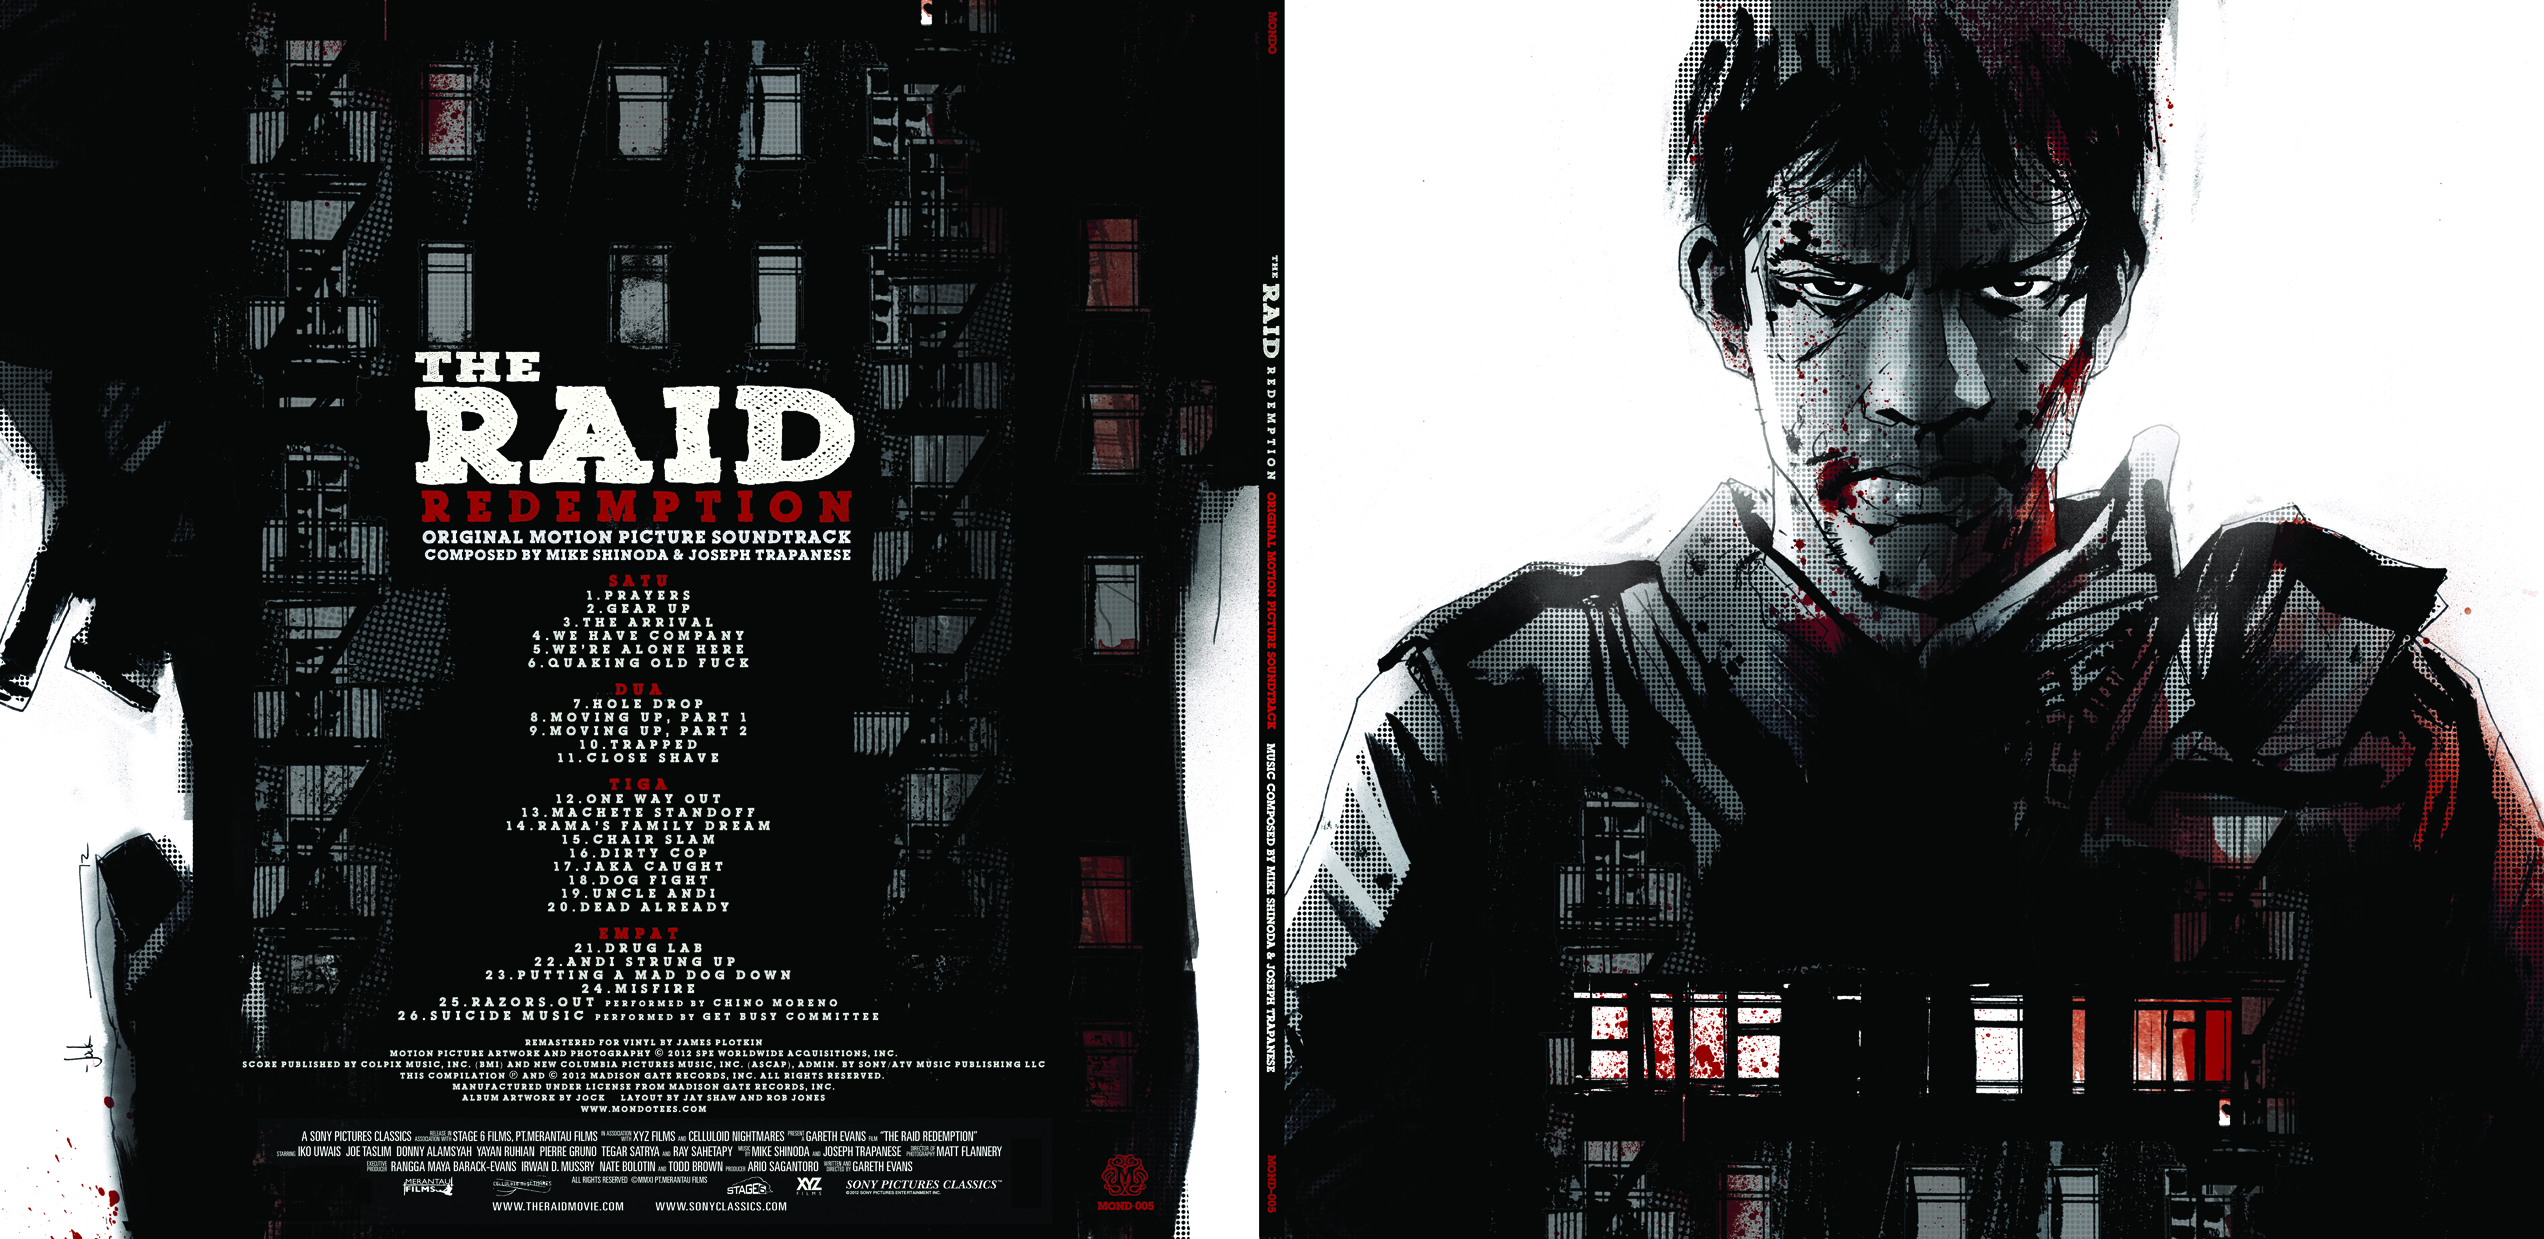 MONDO The Raid: Redemption Soundtrack Limited Edition Vinyl To Be Released On May 24th